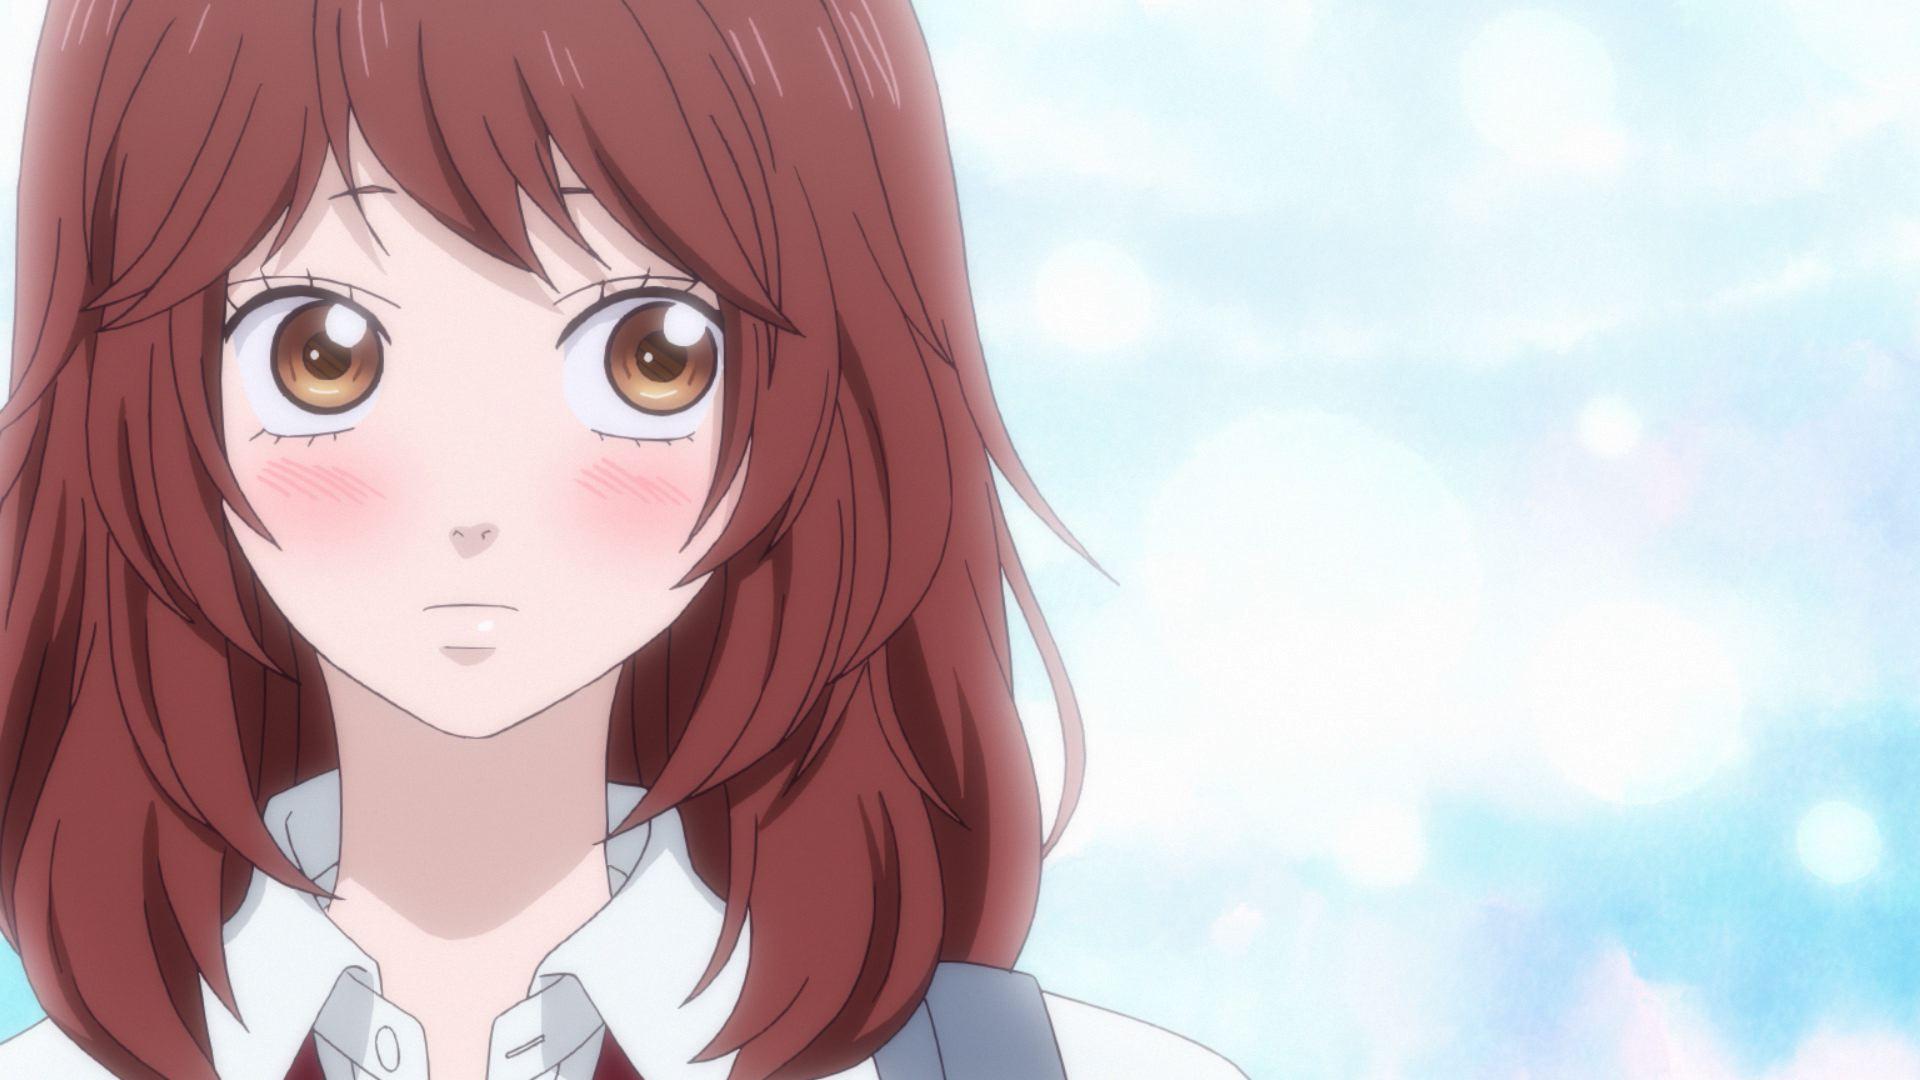 Blue Spring Ride is THE BEST Shoujo Anime  ANIME REVIEW (Ao Haru Ride /  アオハライド) 